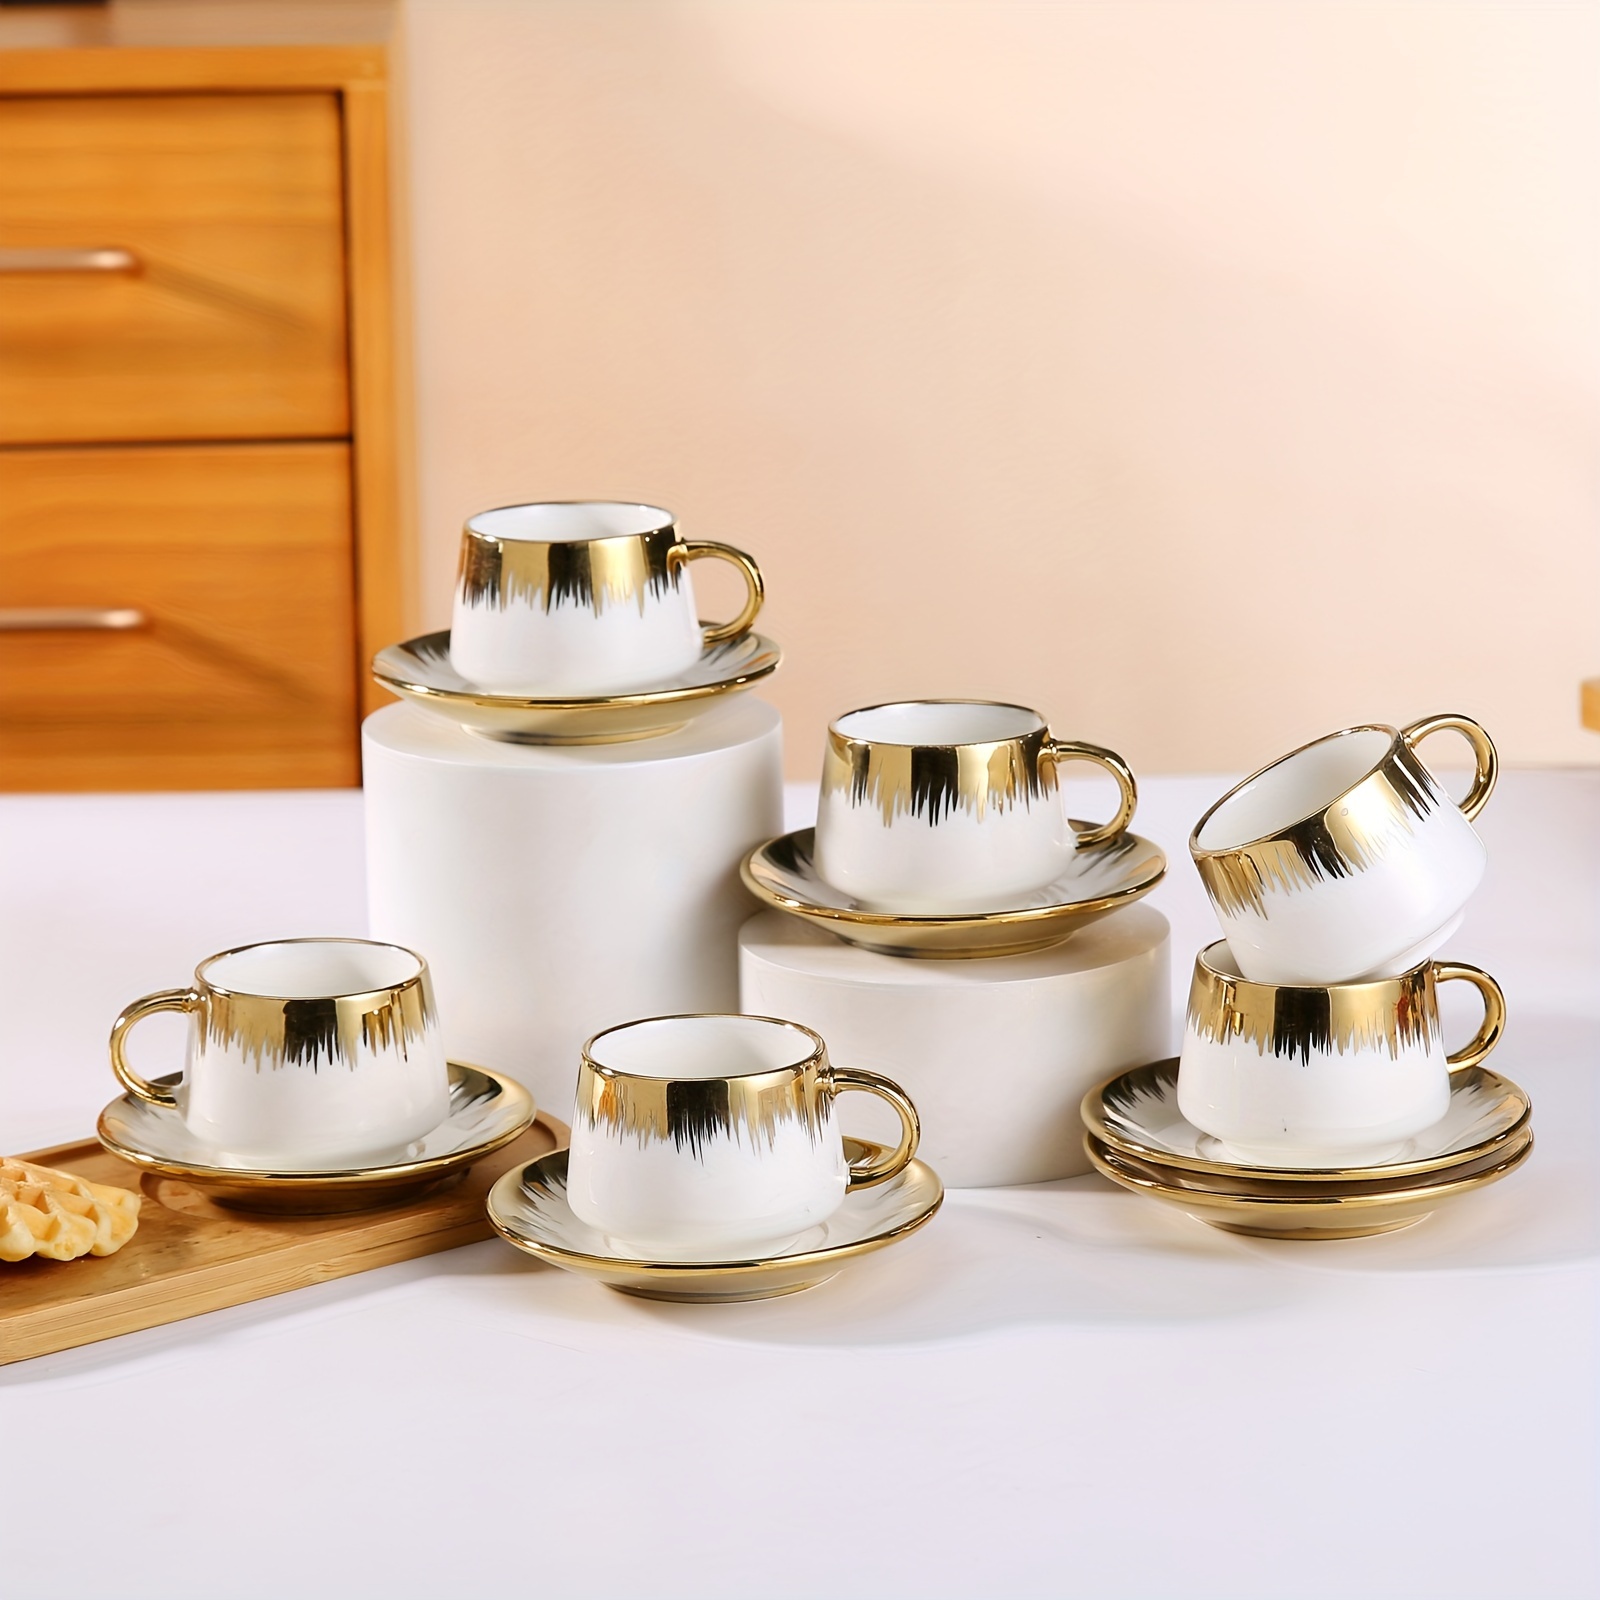 

Turkish Style Gold-plated Ceramic Espresso Cups And Saucers Set – 6 Cups, 6 Saucers, Elegant European Design, Durable Quality Tea Coffee Serving Set